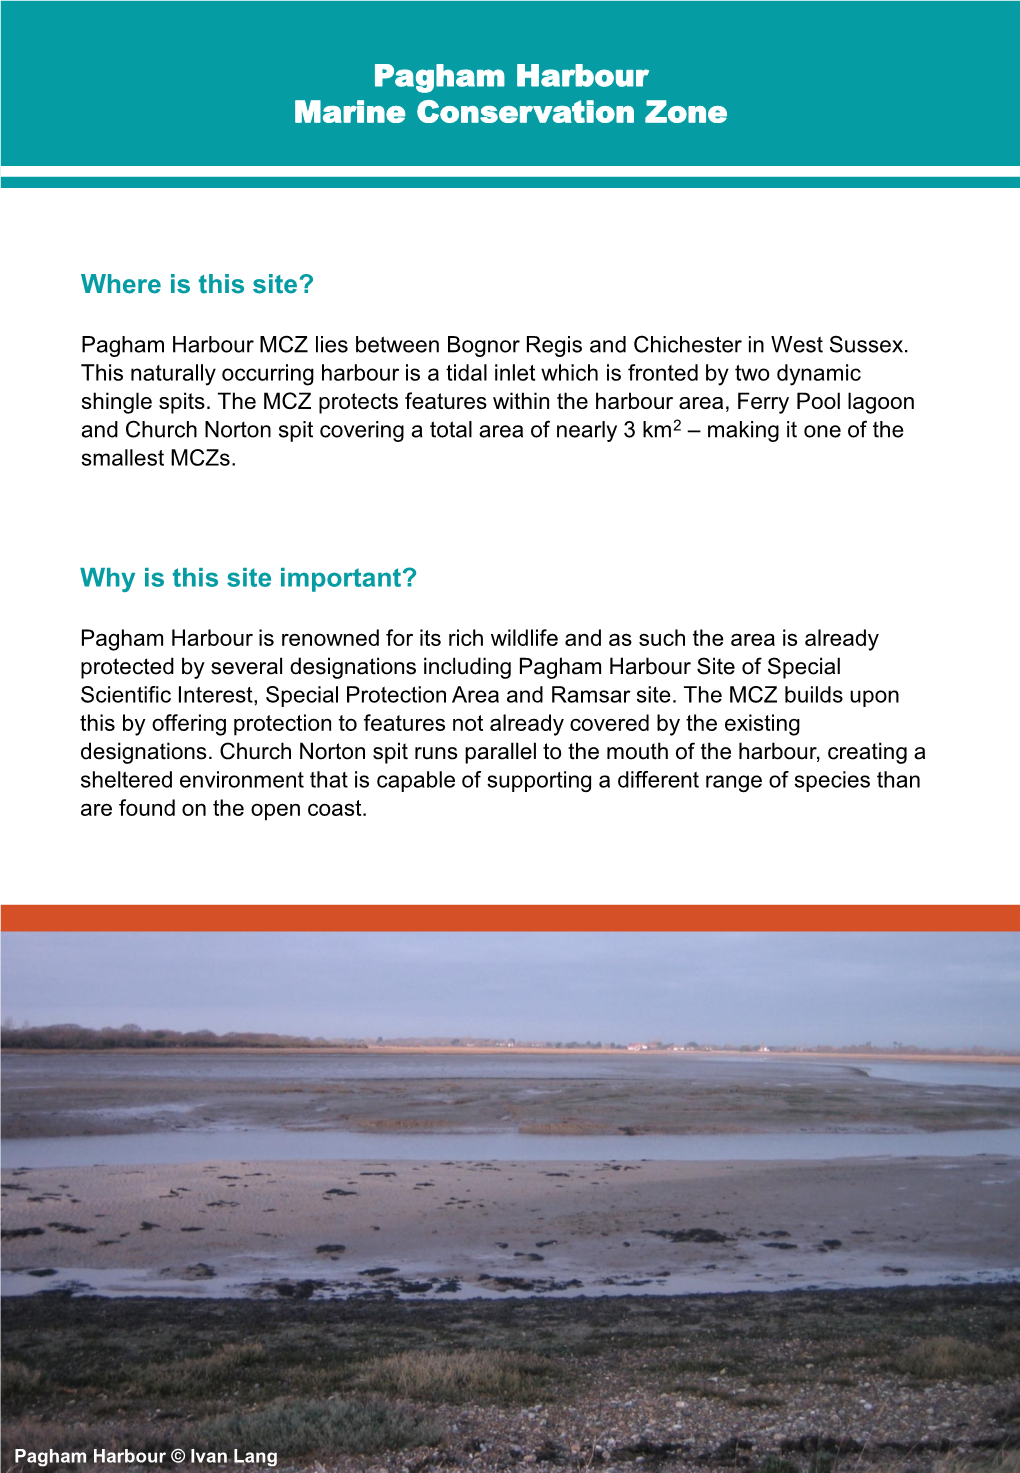 Pagham Harbour Marine Conservation Zone